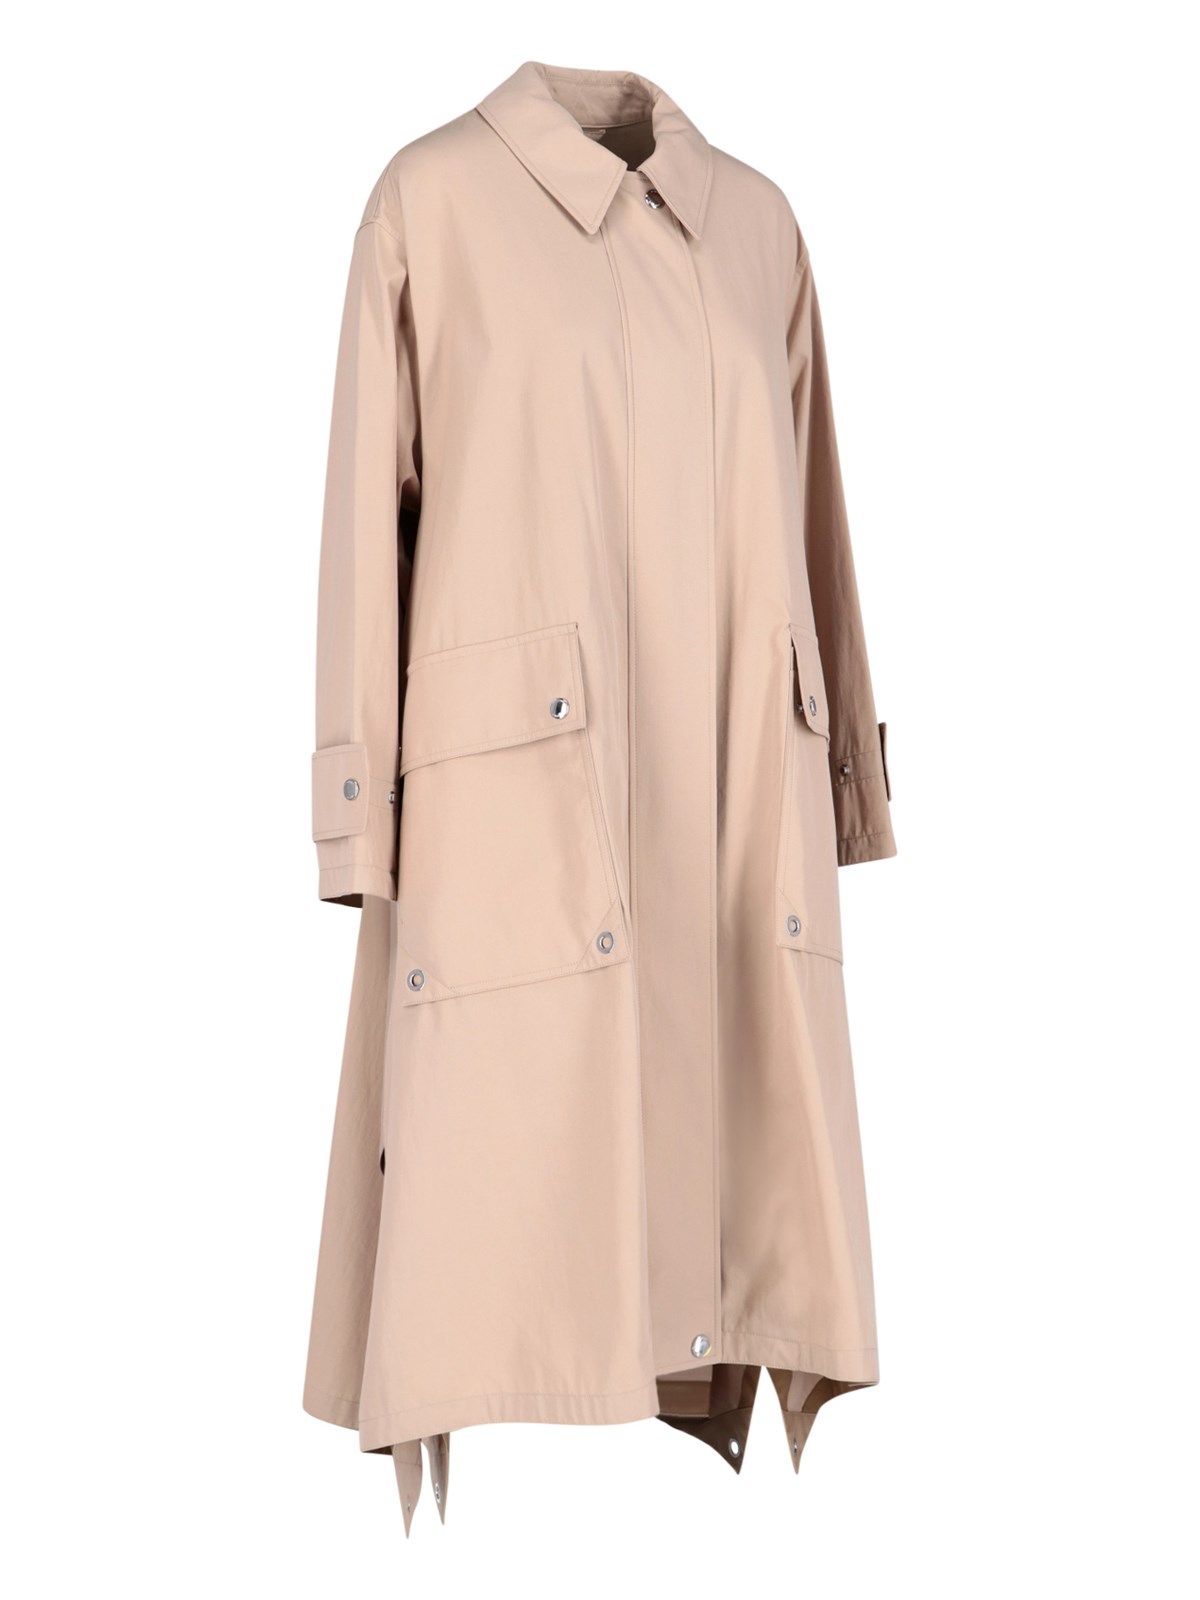 Burberry Oversize 'car coat' trench available on SUGAR - 91788